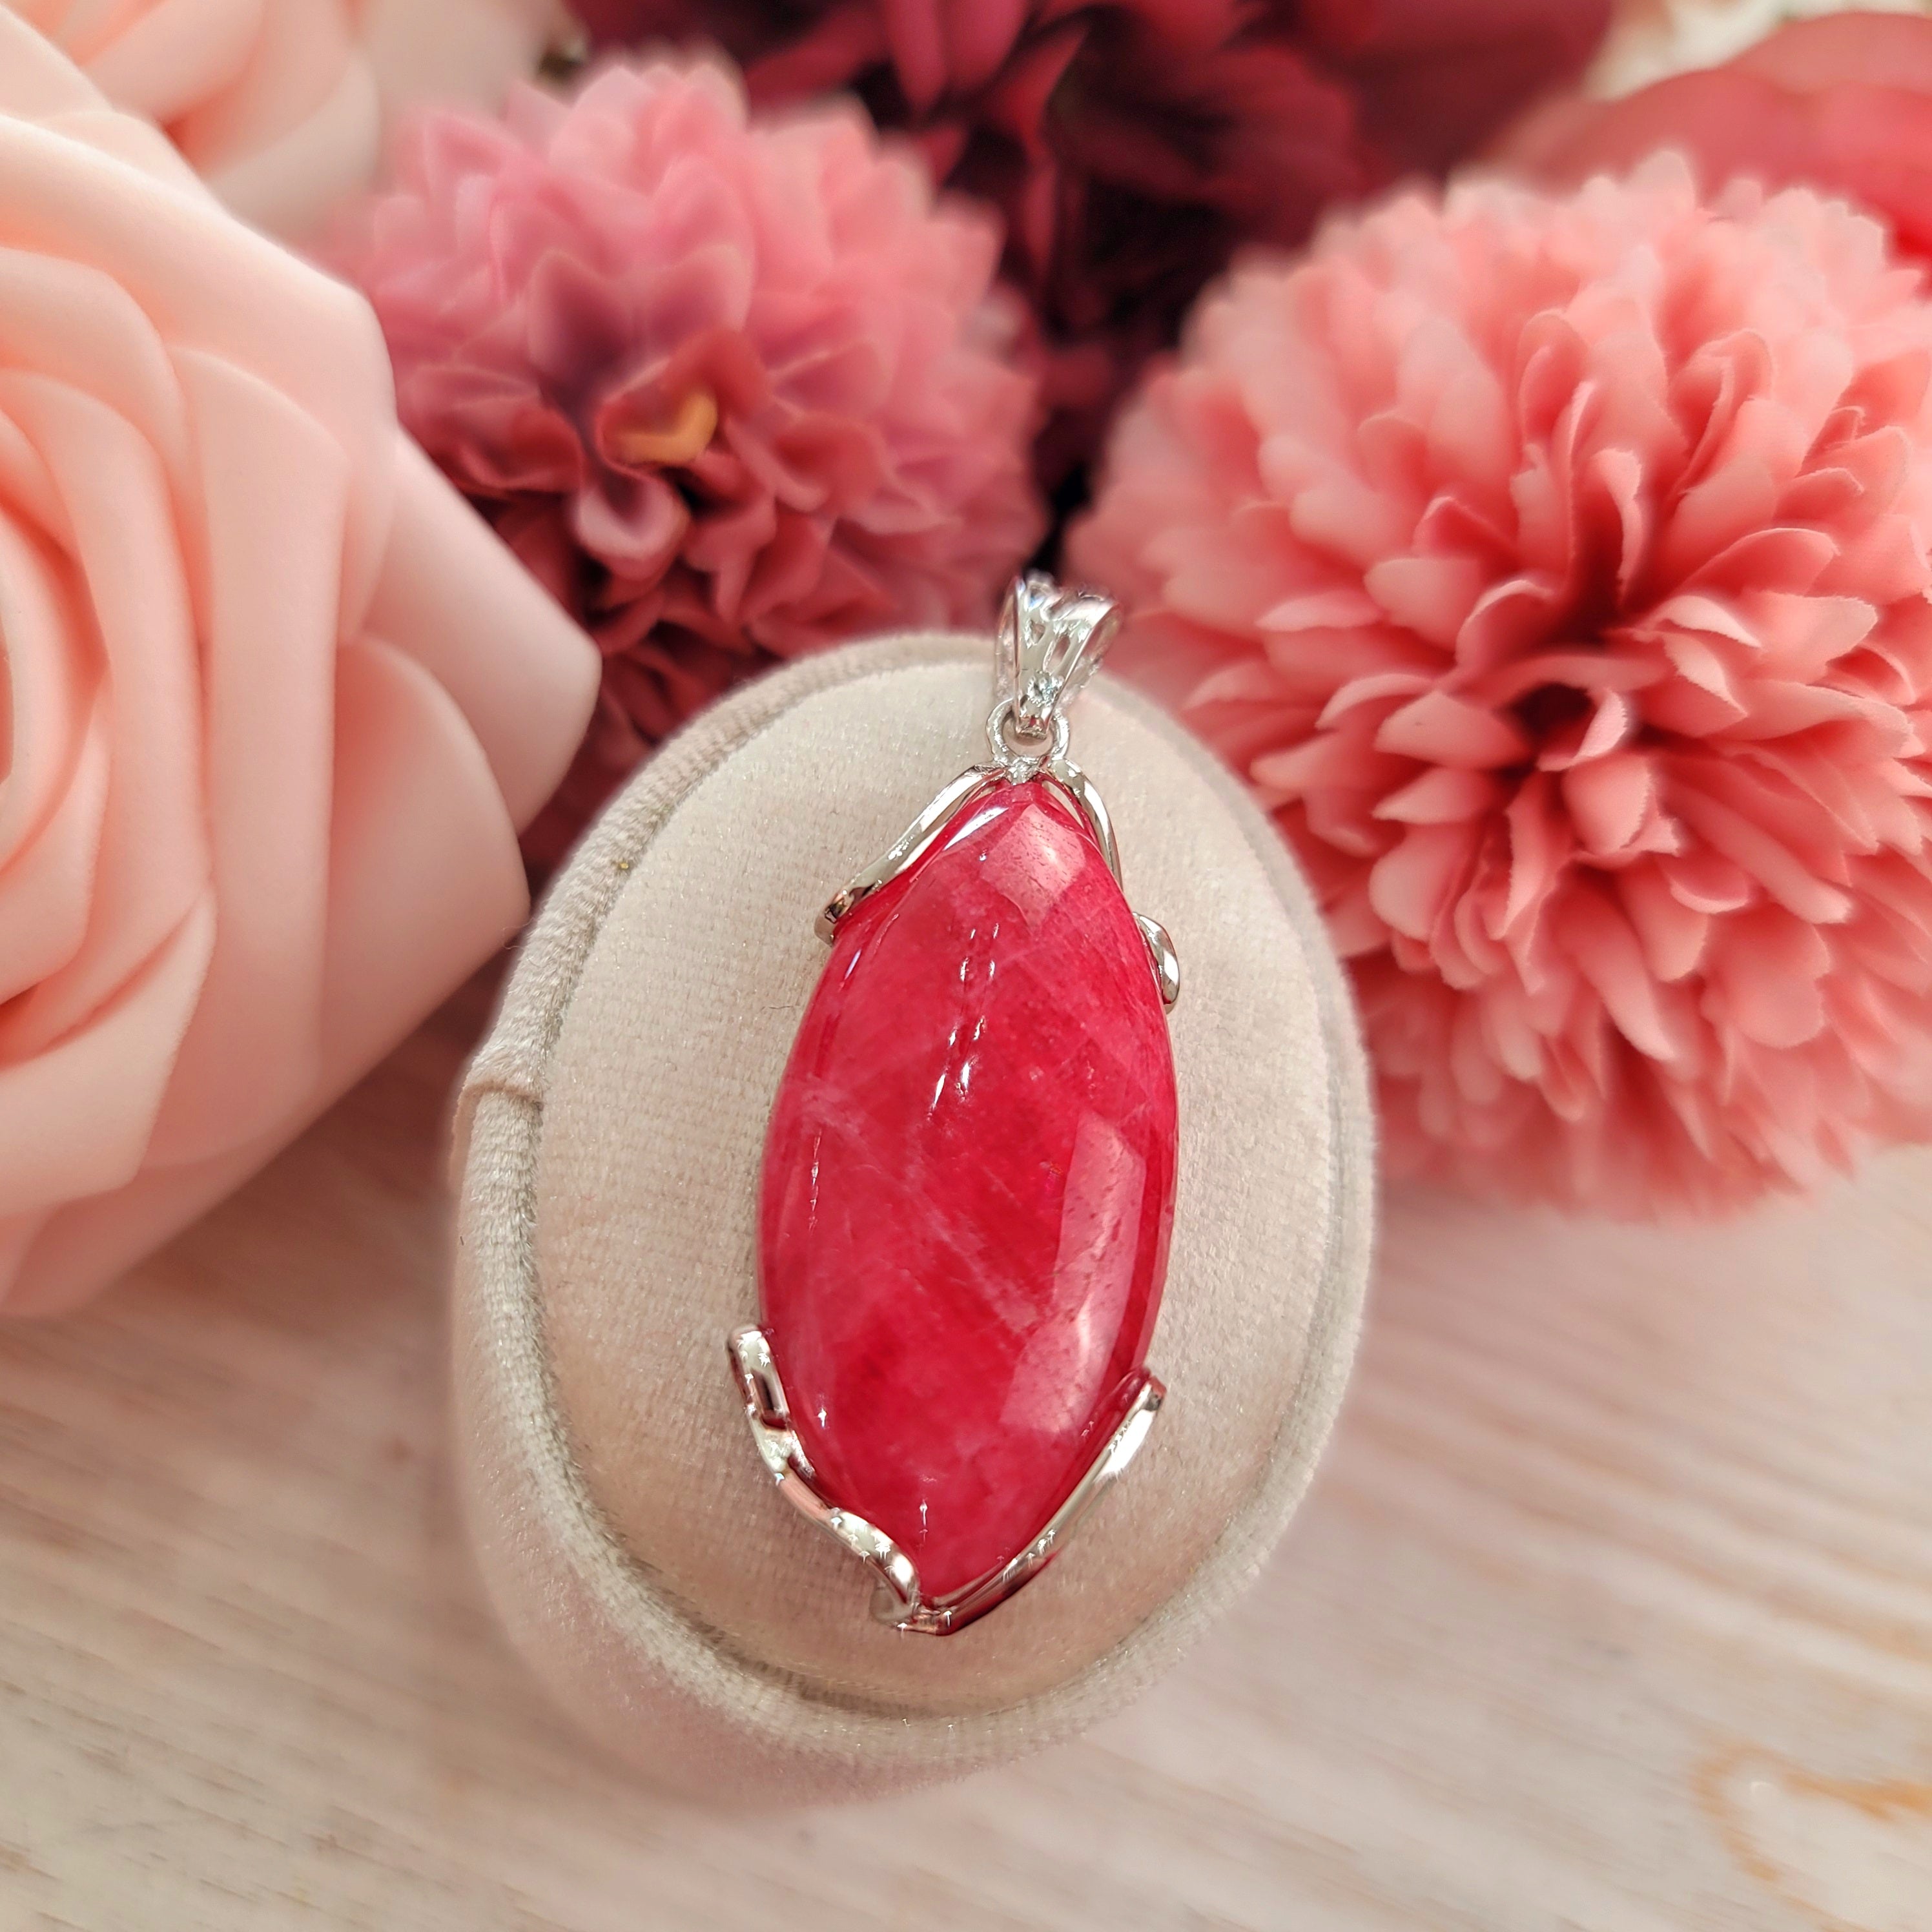 Gem Rhodonite Pendant for Loving Yourself and Enhancing your Self-Worth